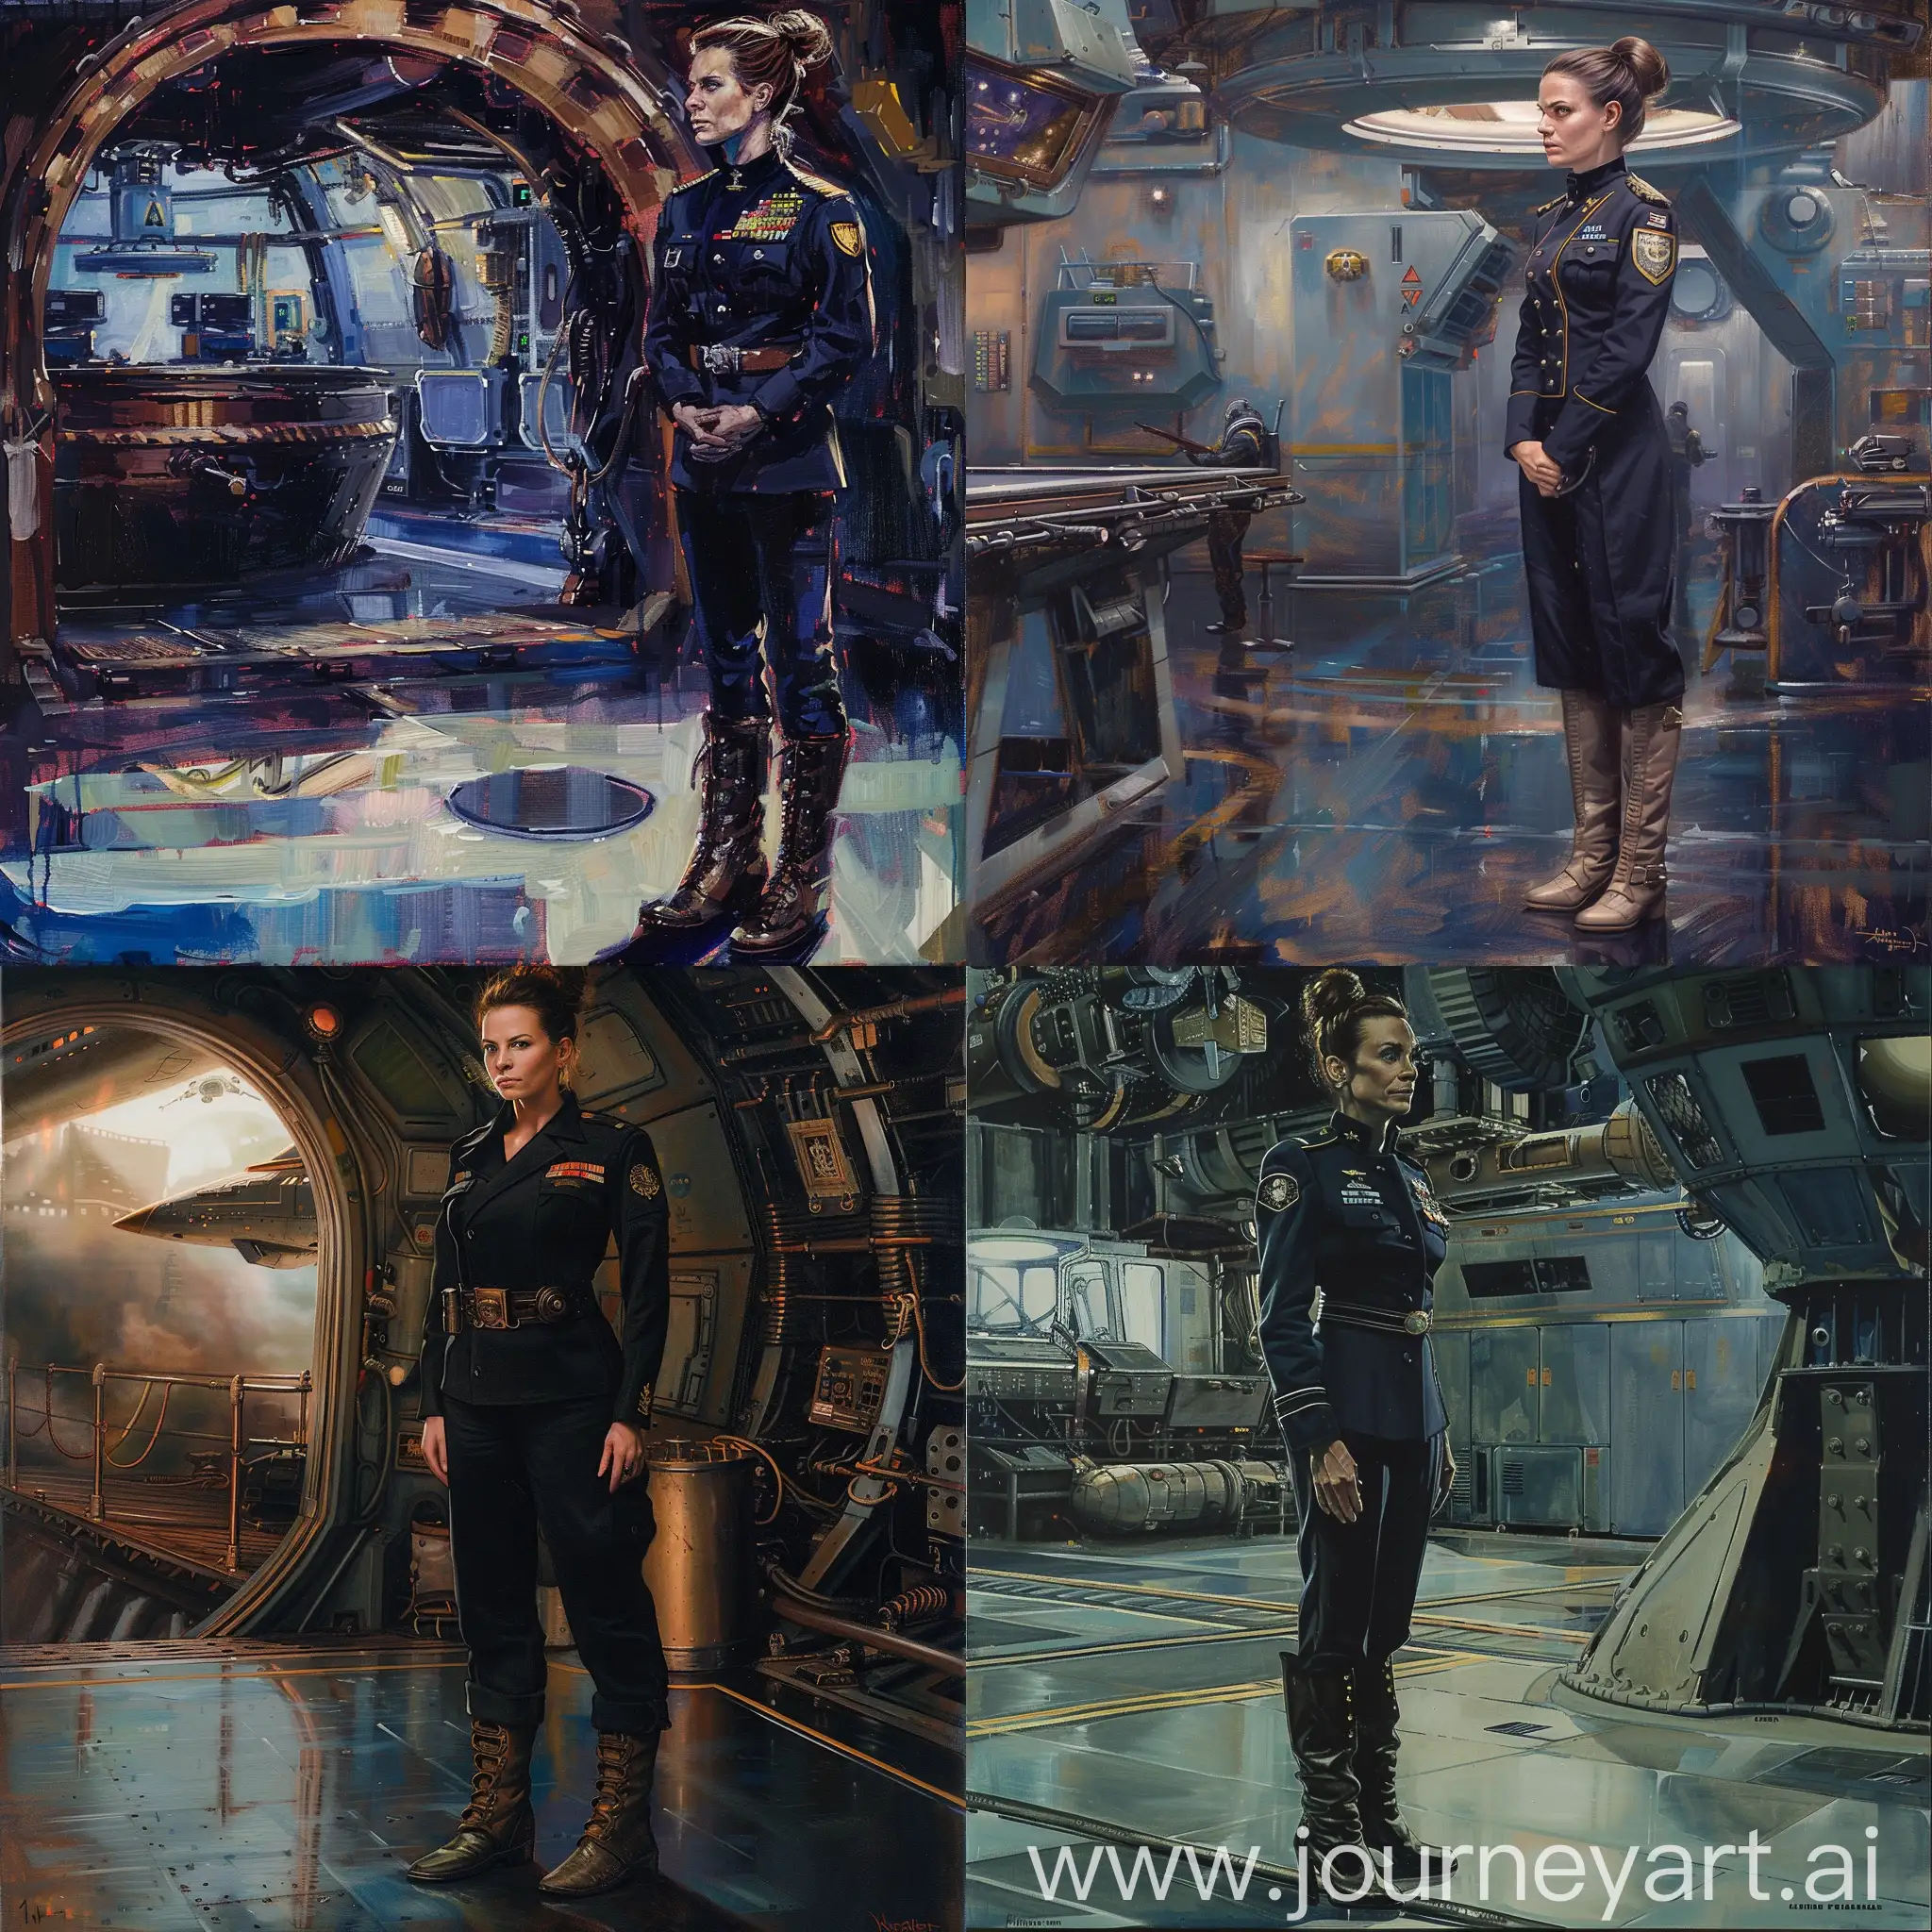 painting of navy officer woman, stern face, tidy hairbun, standing tall, long boots, spaceship room background, warhammer